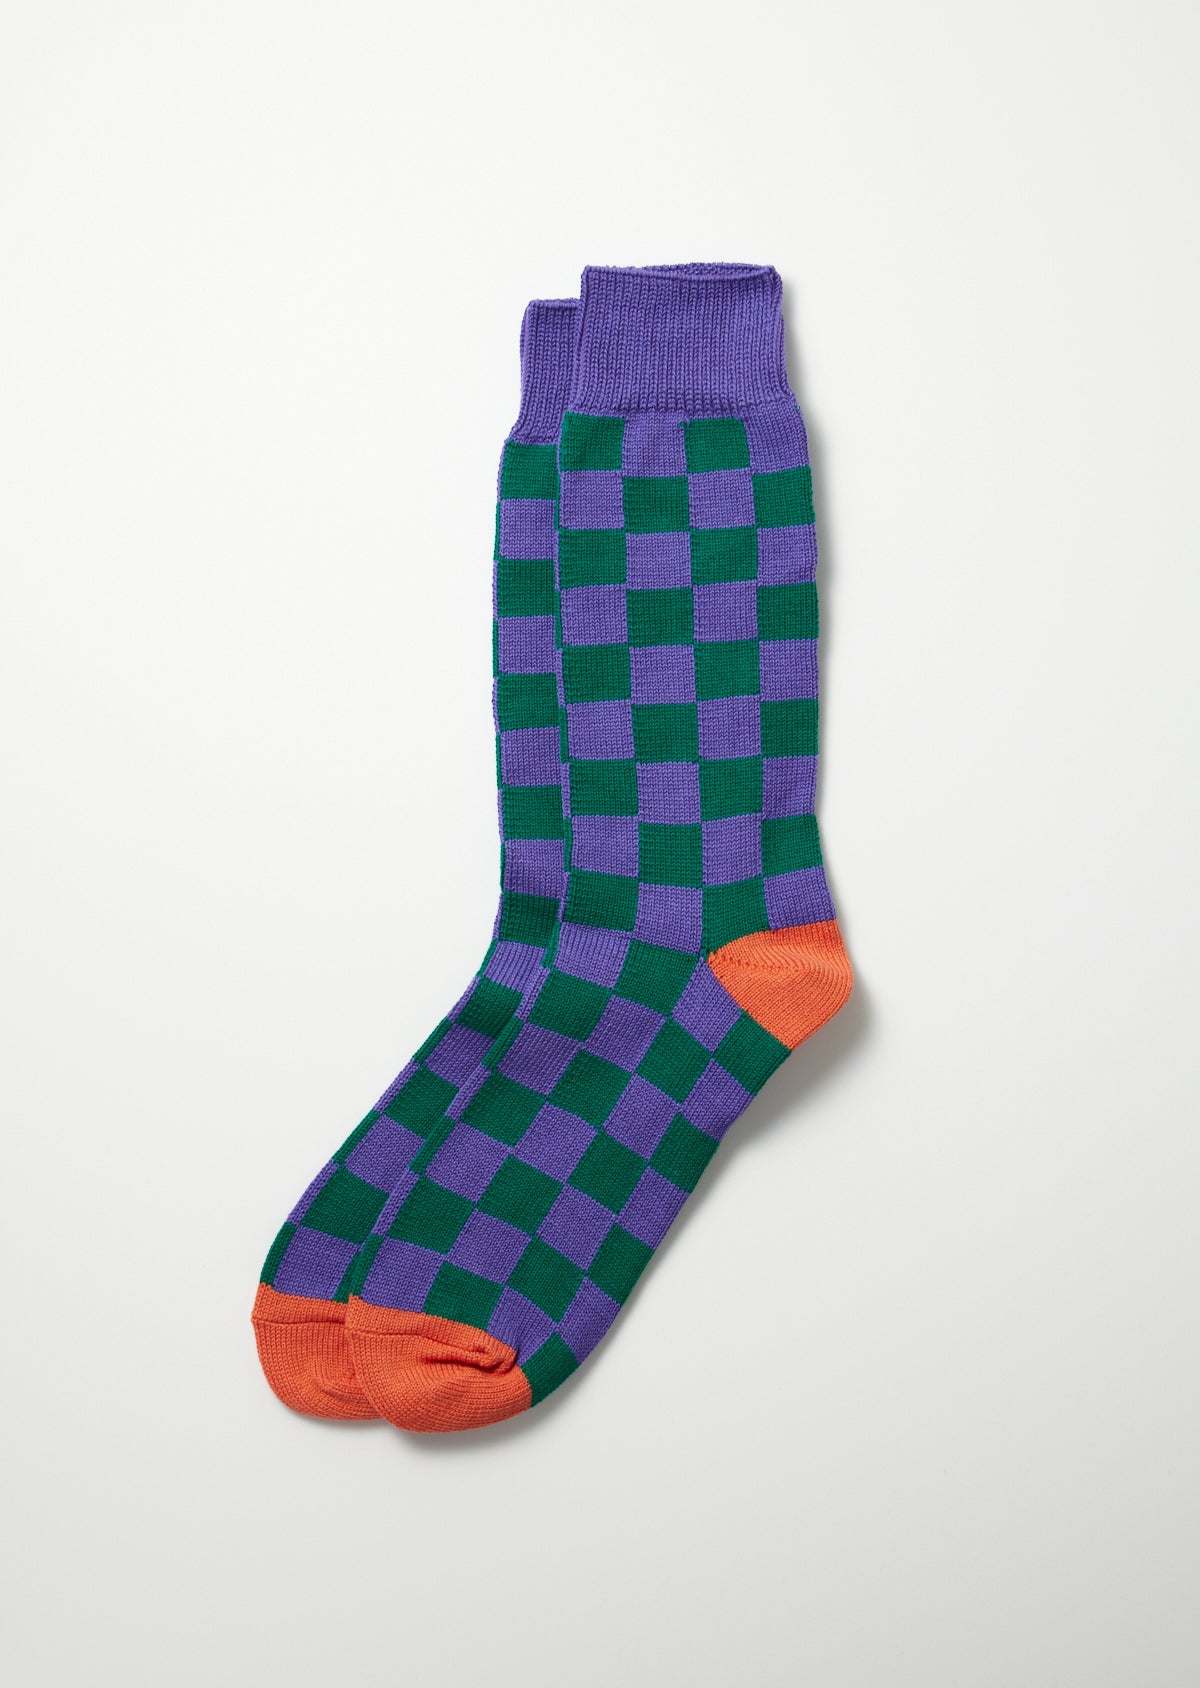 Rototo Checkerboard Crew Socks in purple and green check with orange heel and toe